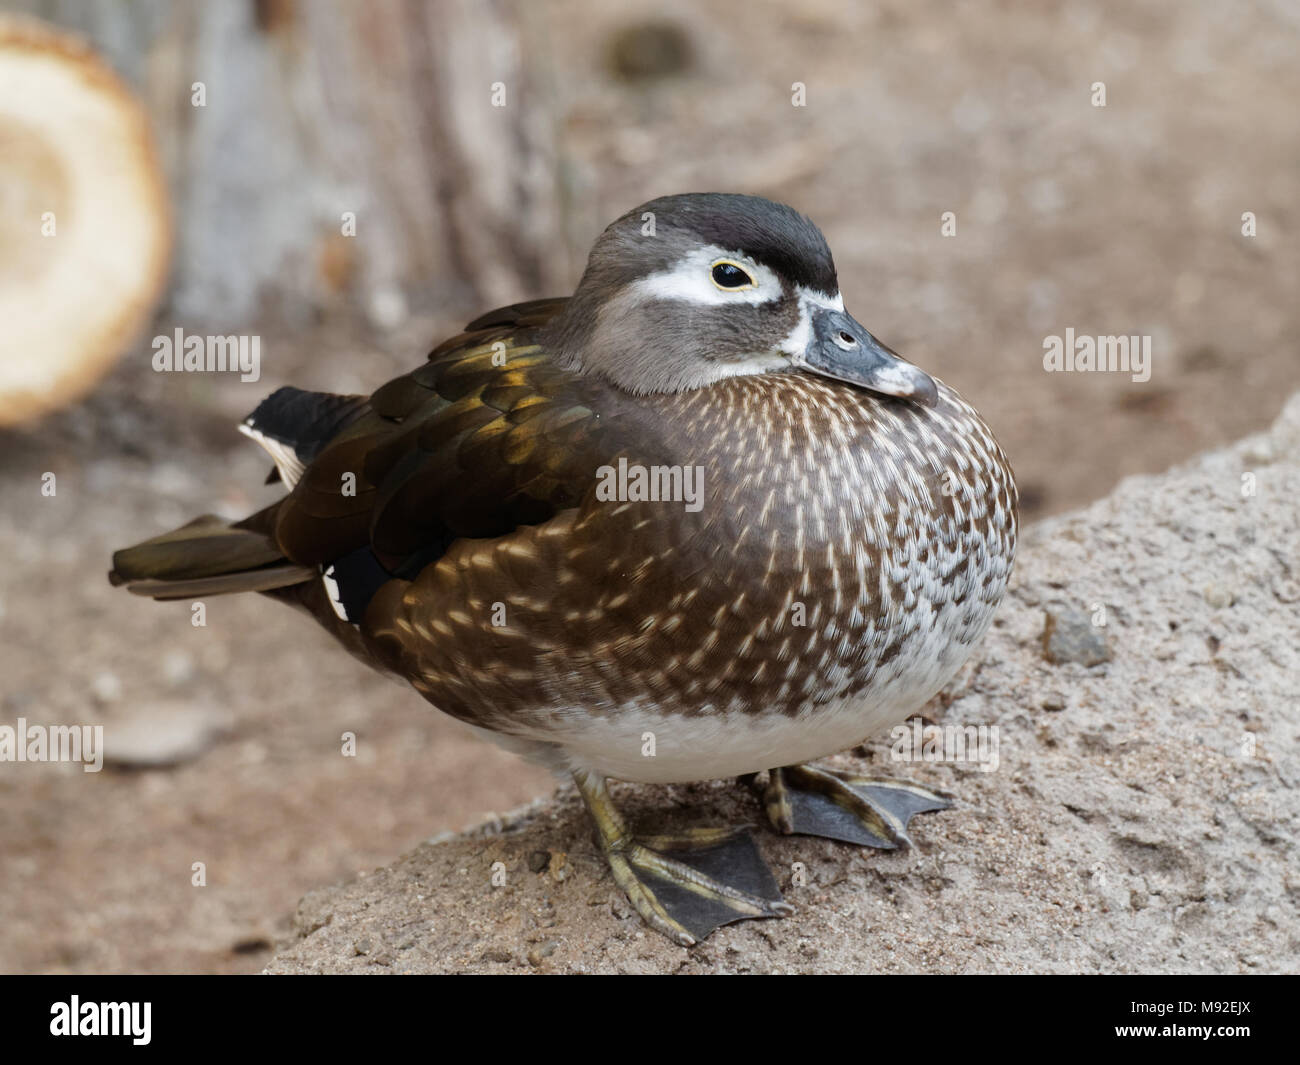 Quebec,Canada. A female wood duck at the Montreal Biodome Stock Photo